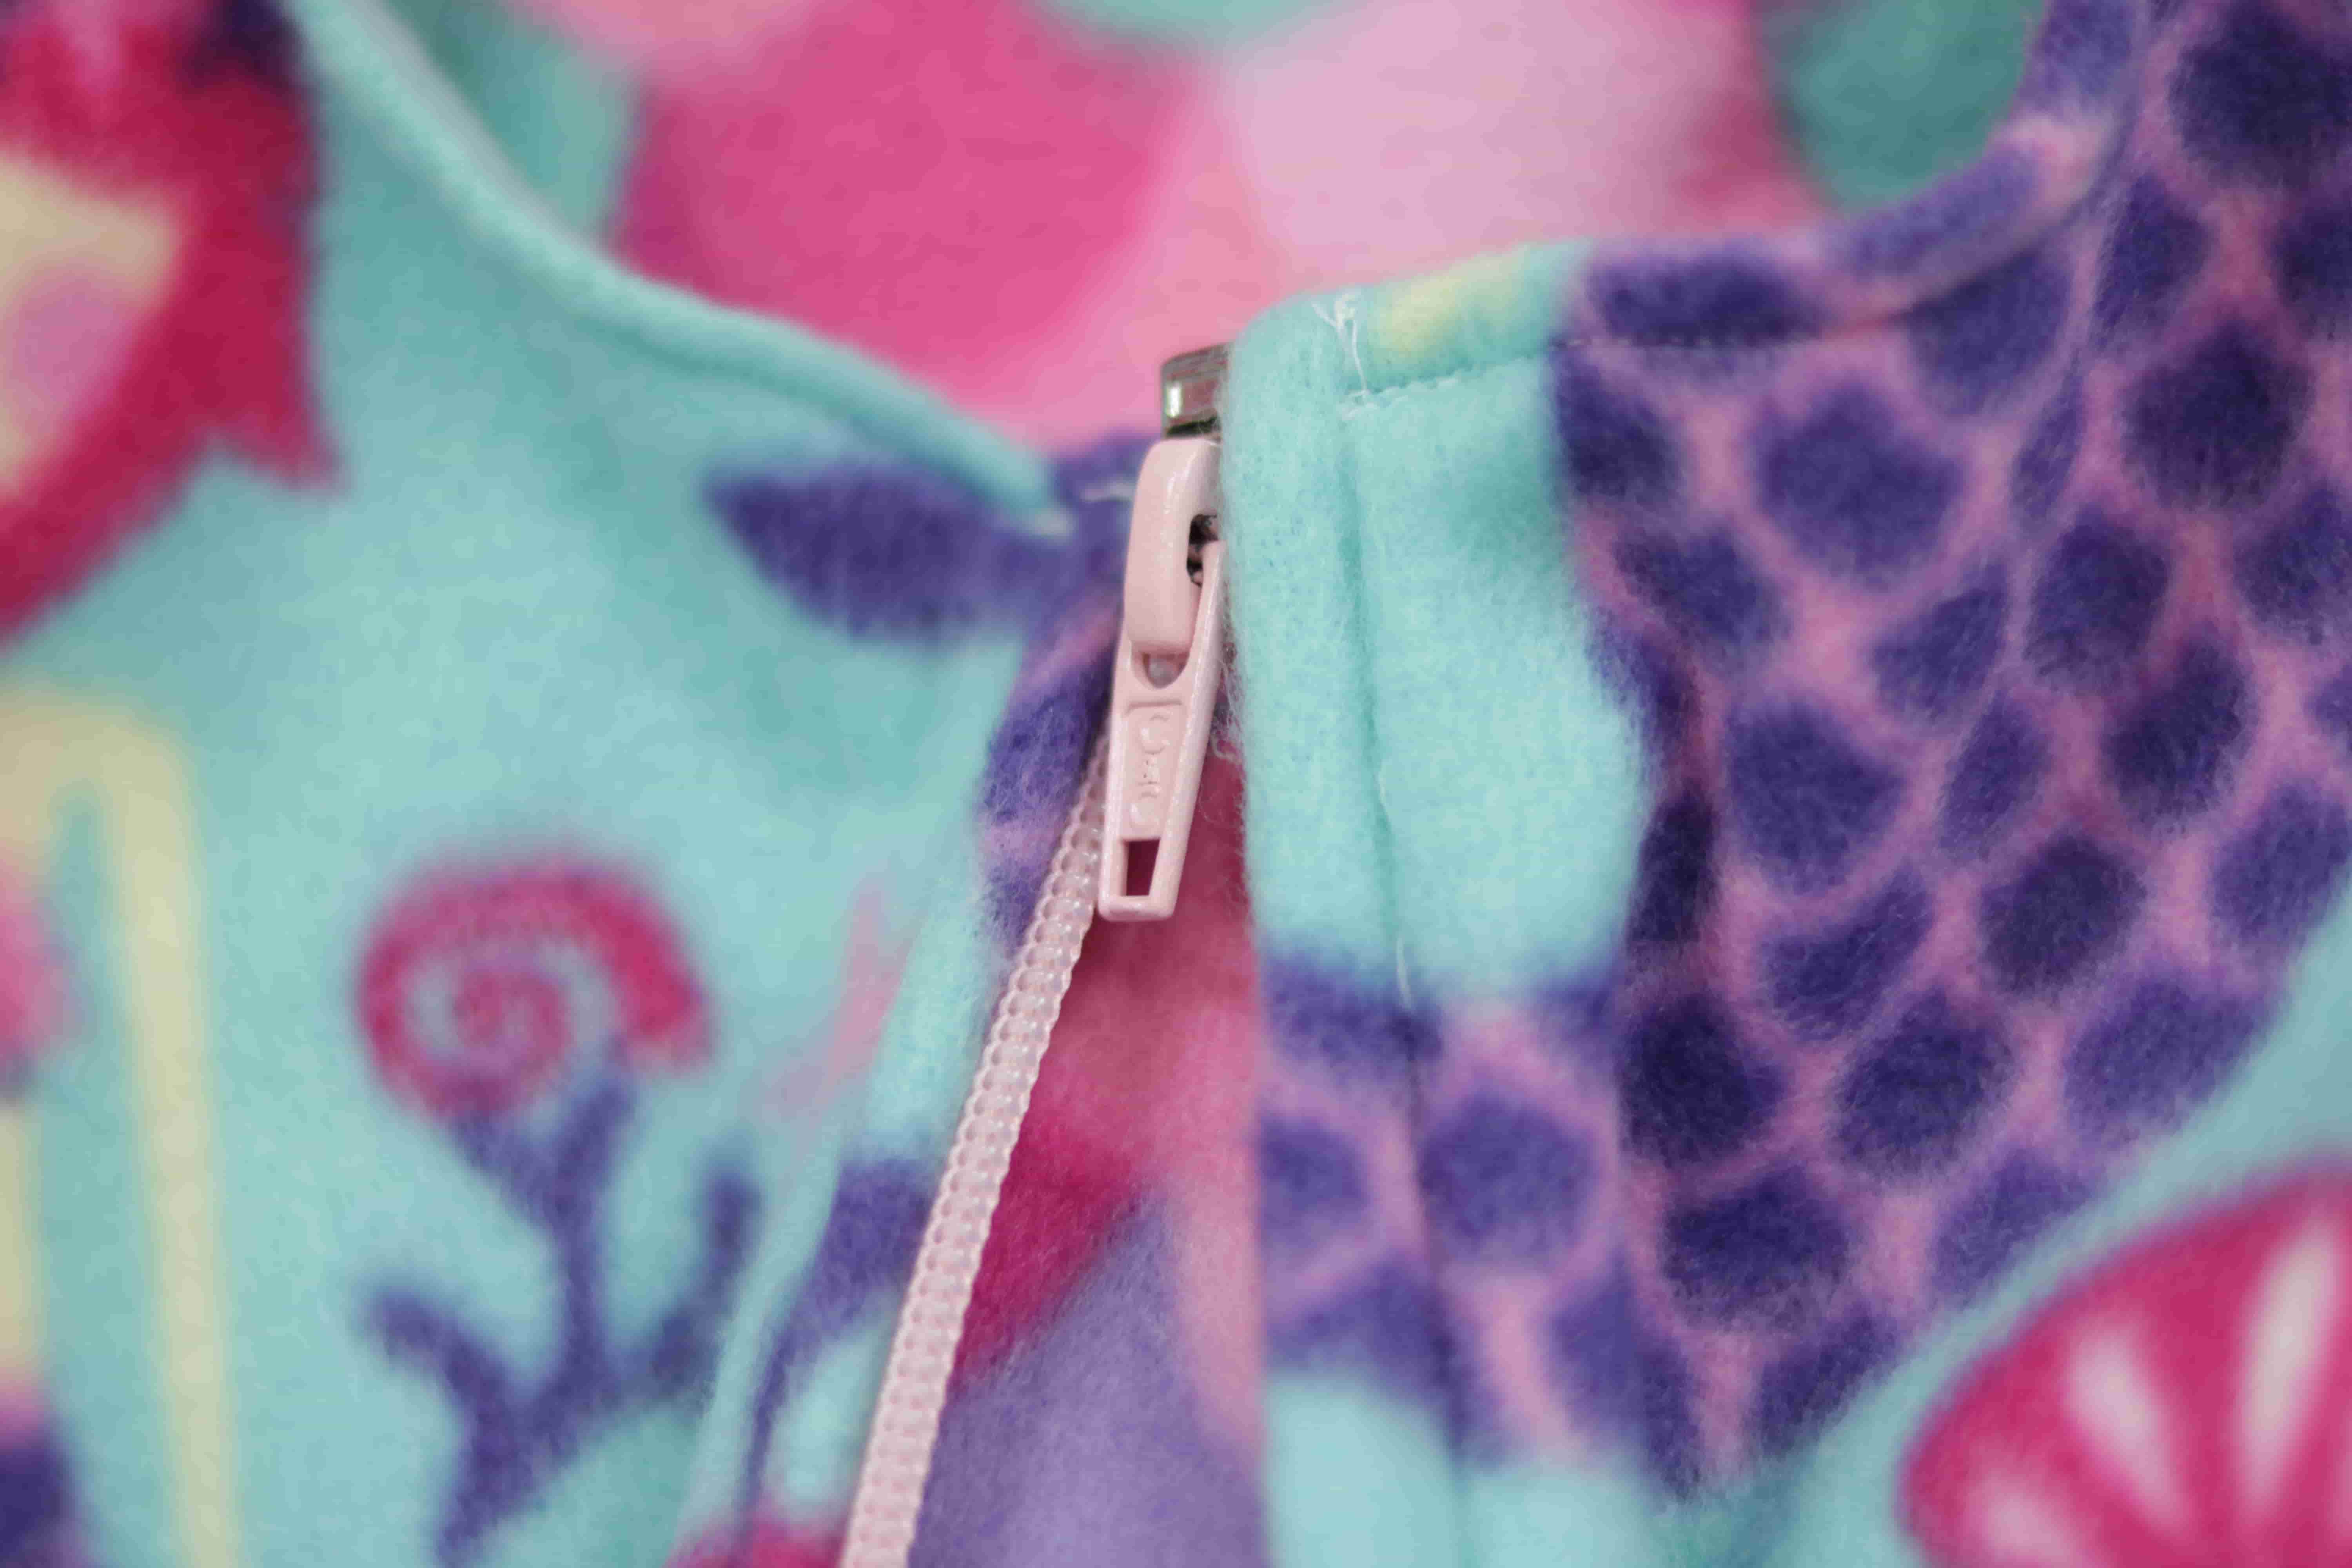 How to Sew a Separating Zipper 